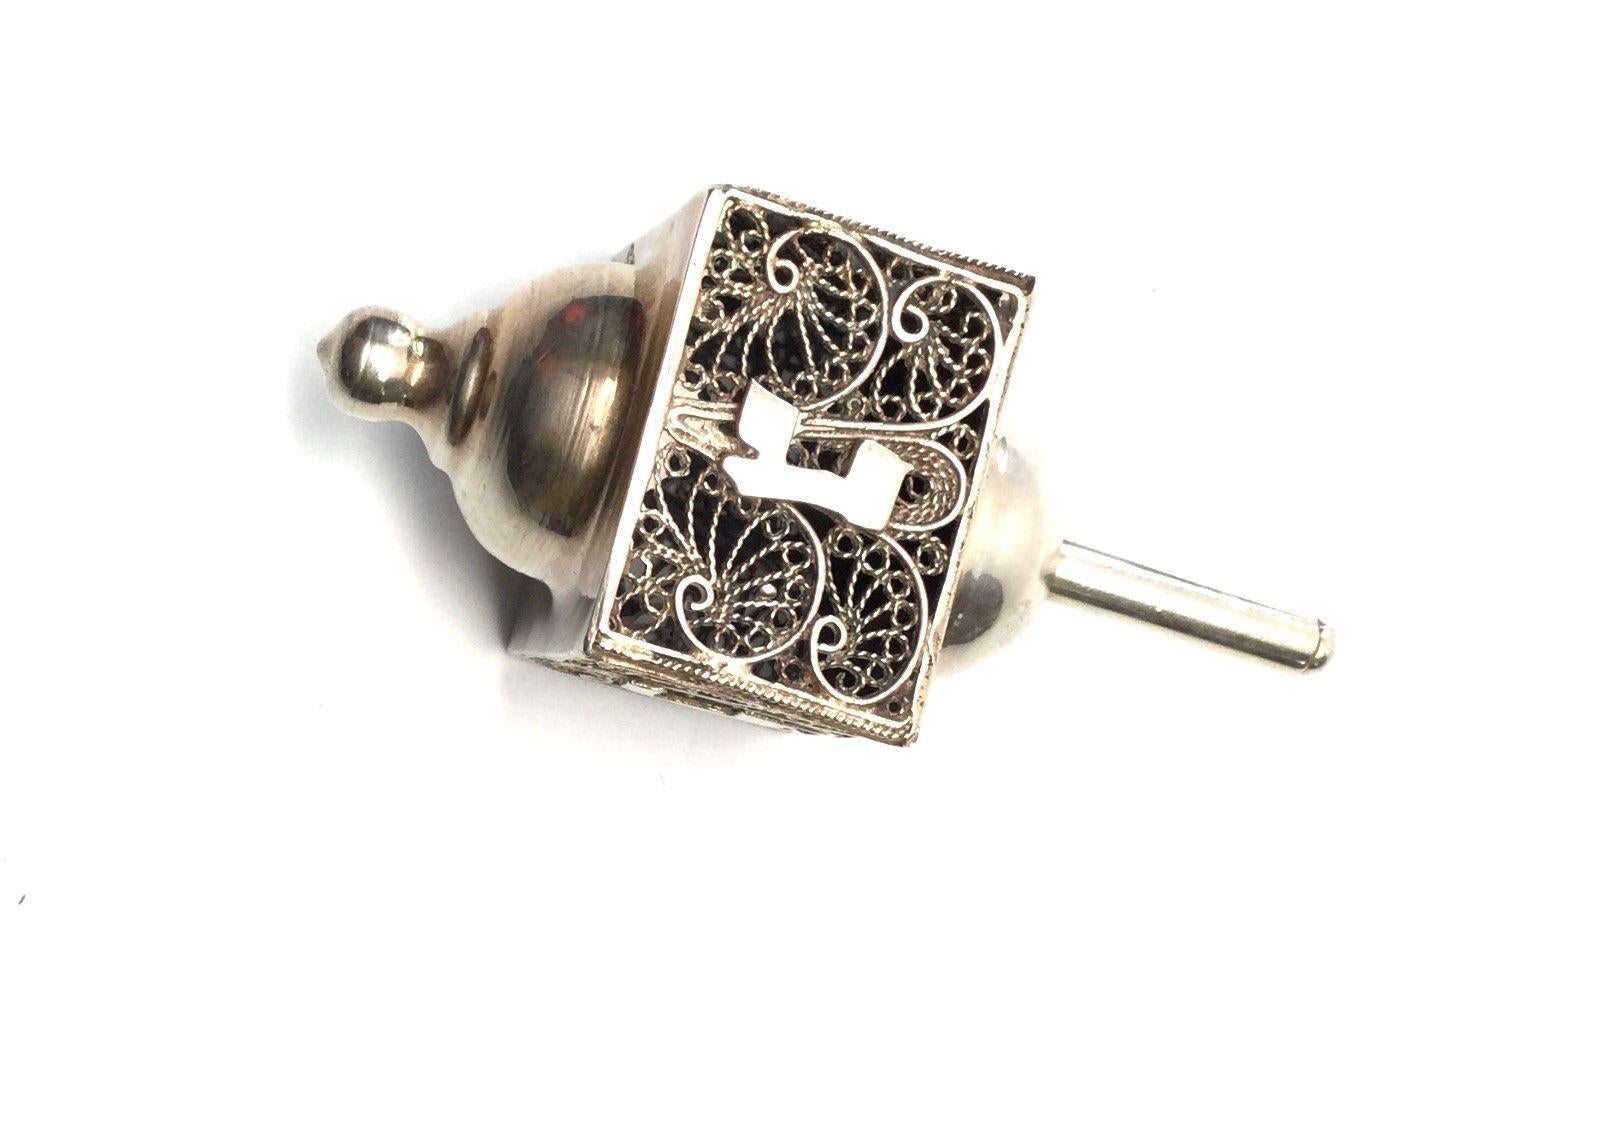 Chanukkah Hanukkah sterling silver dreidel. This is a beautifully designed dreidel with filigree pattern. This is a perfect and great gift for the Hanukkah collector. Measurements: 3